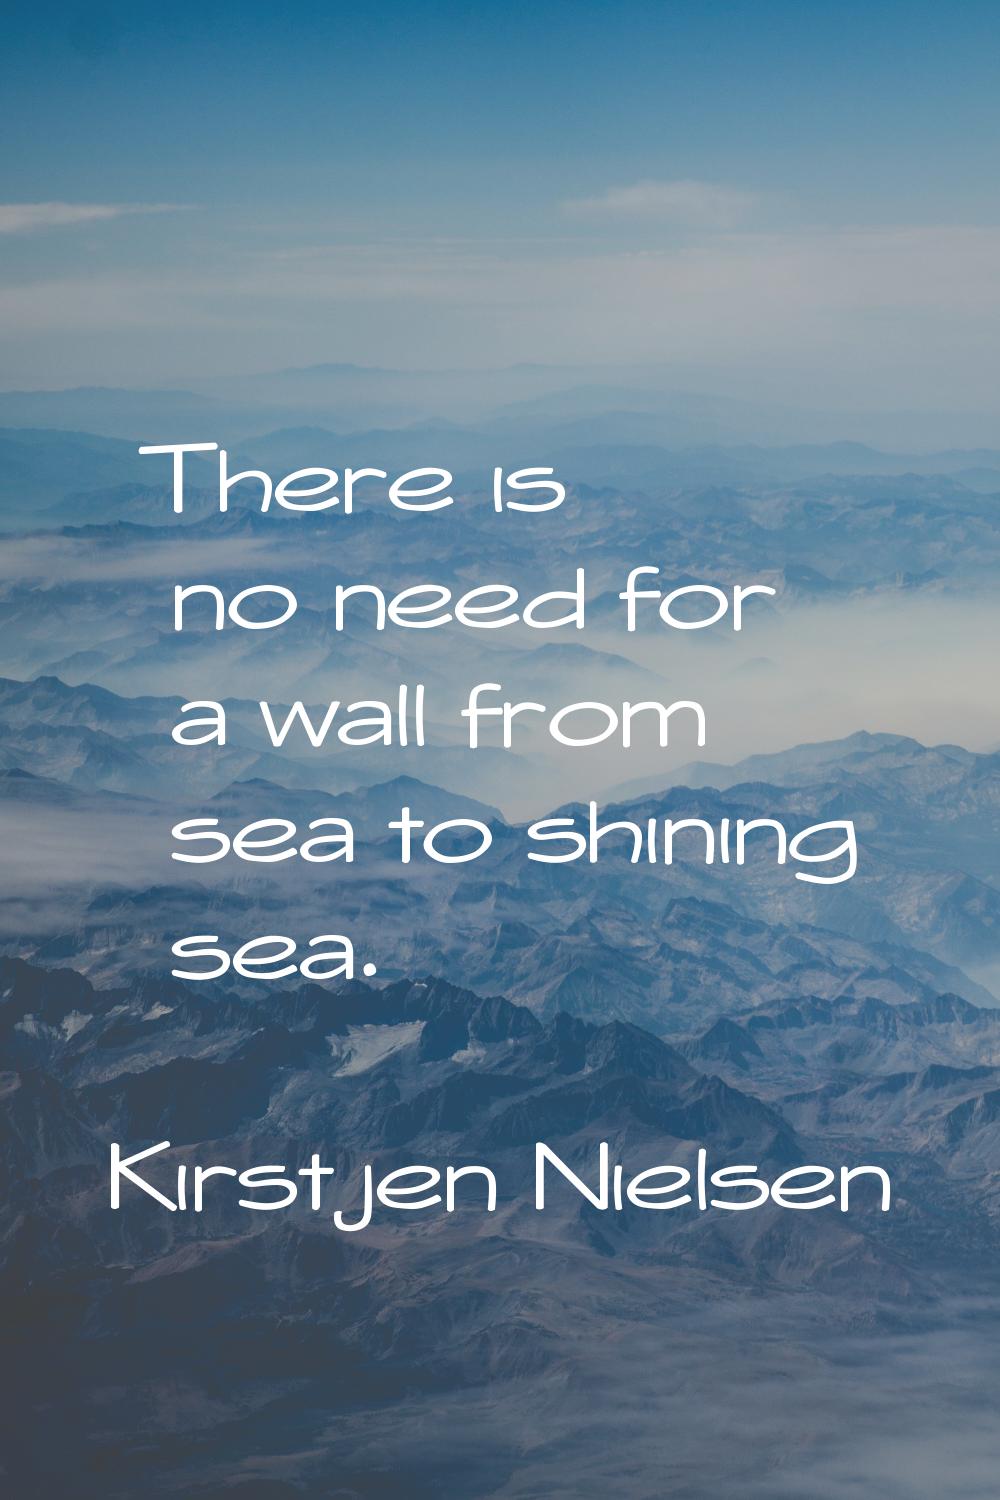 There is no need for a wall from sea to shining sea.